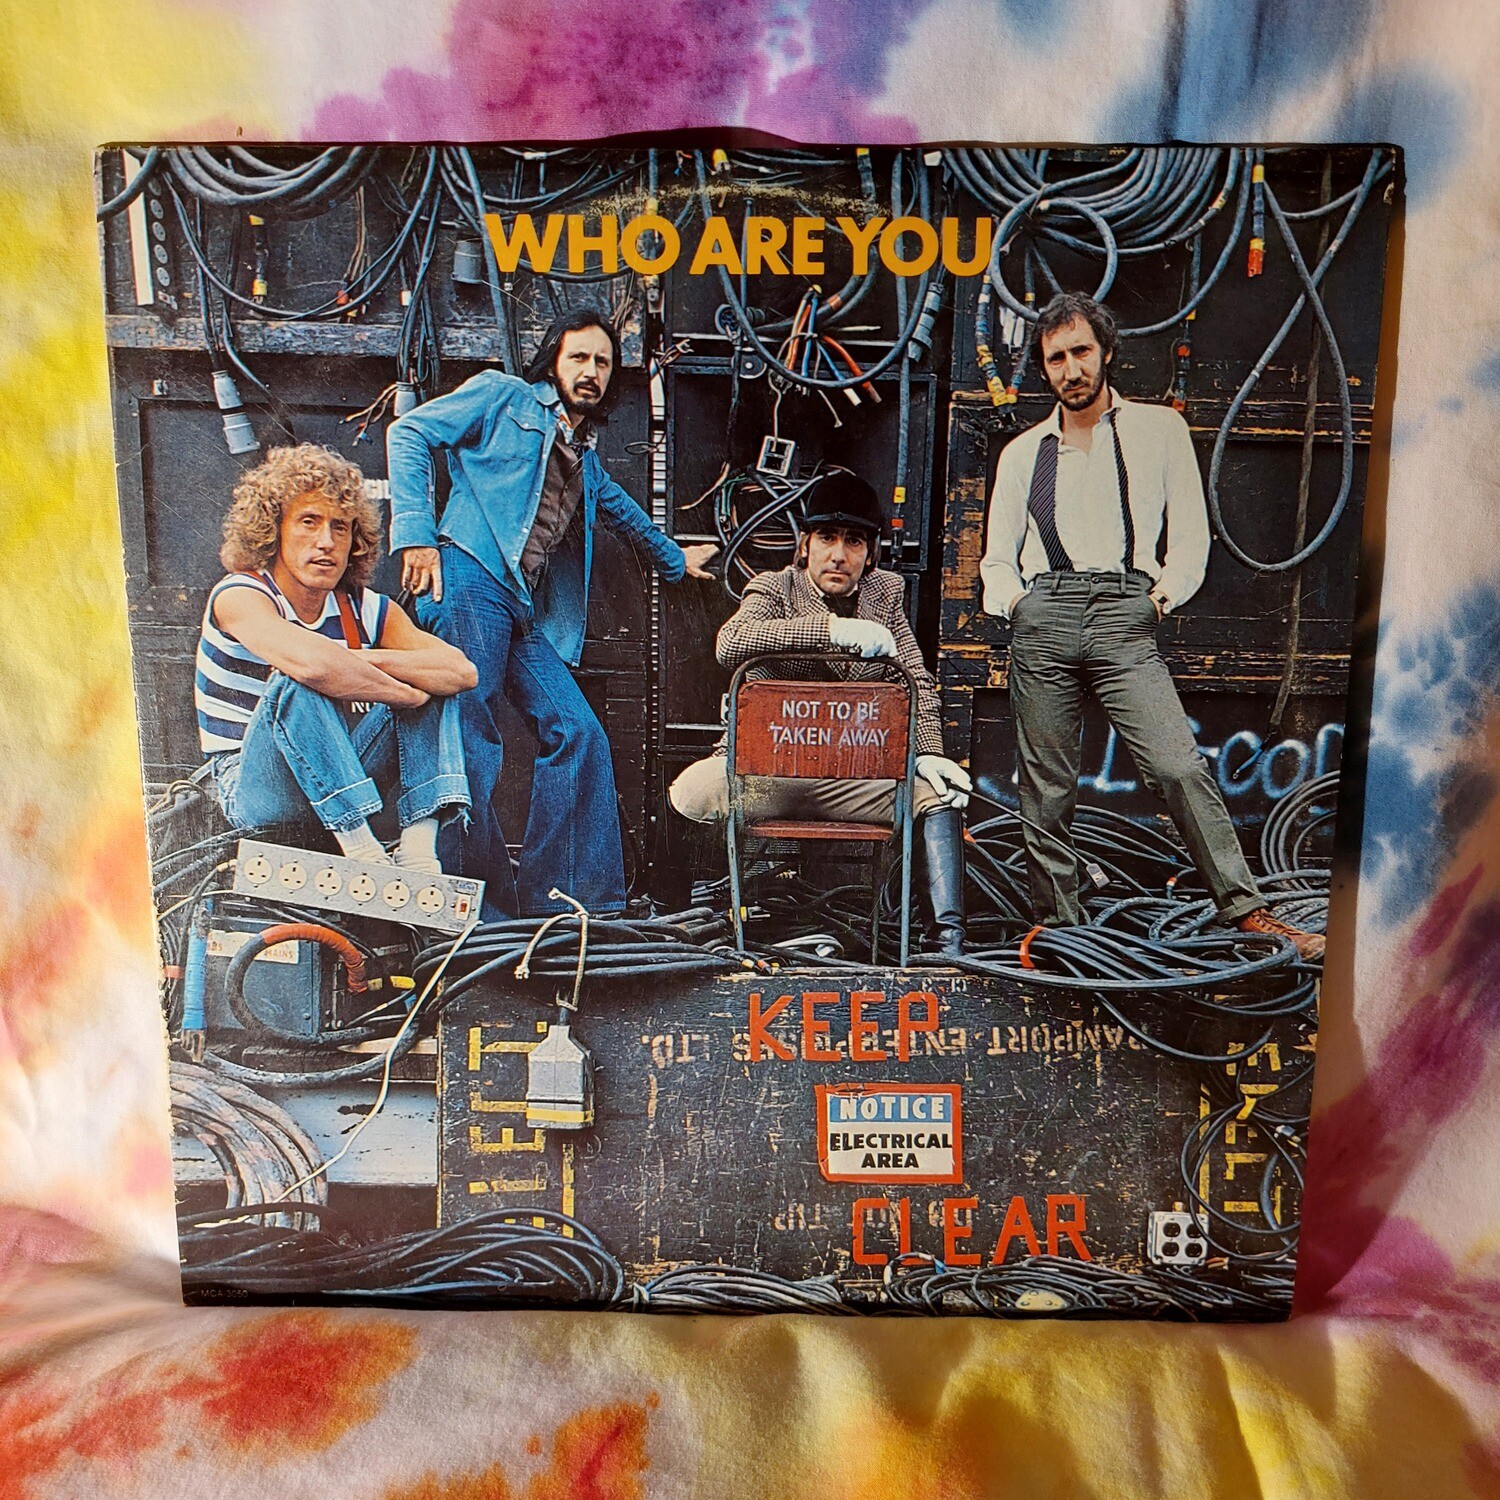 The Who - Who Are You (1978)